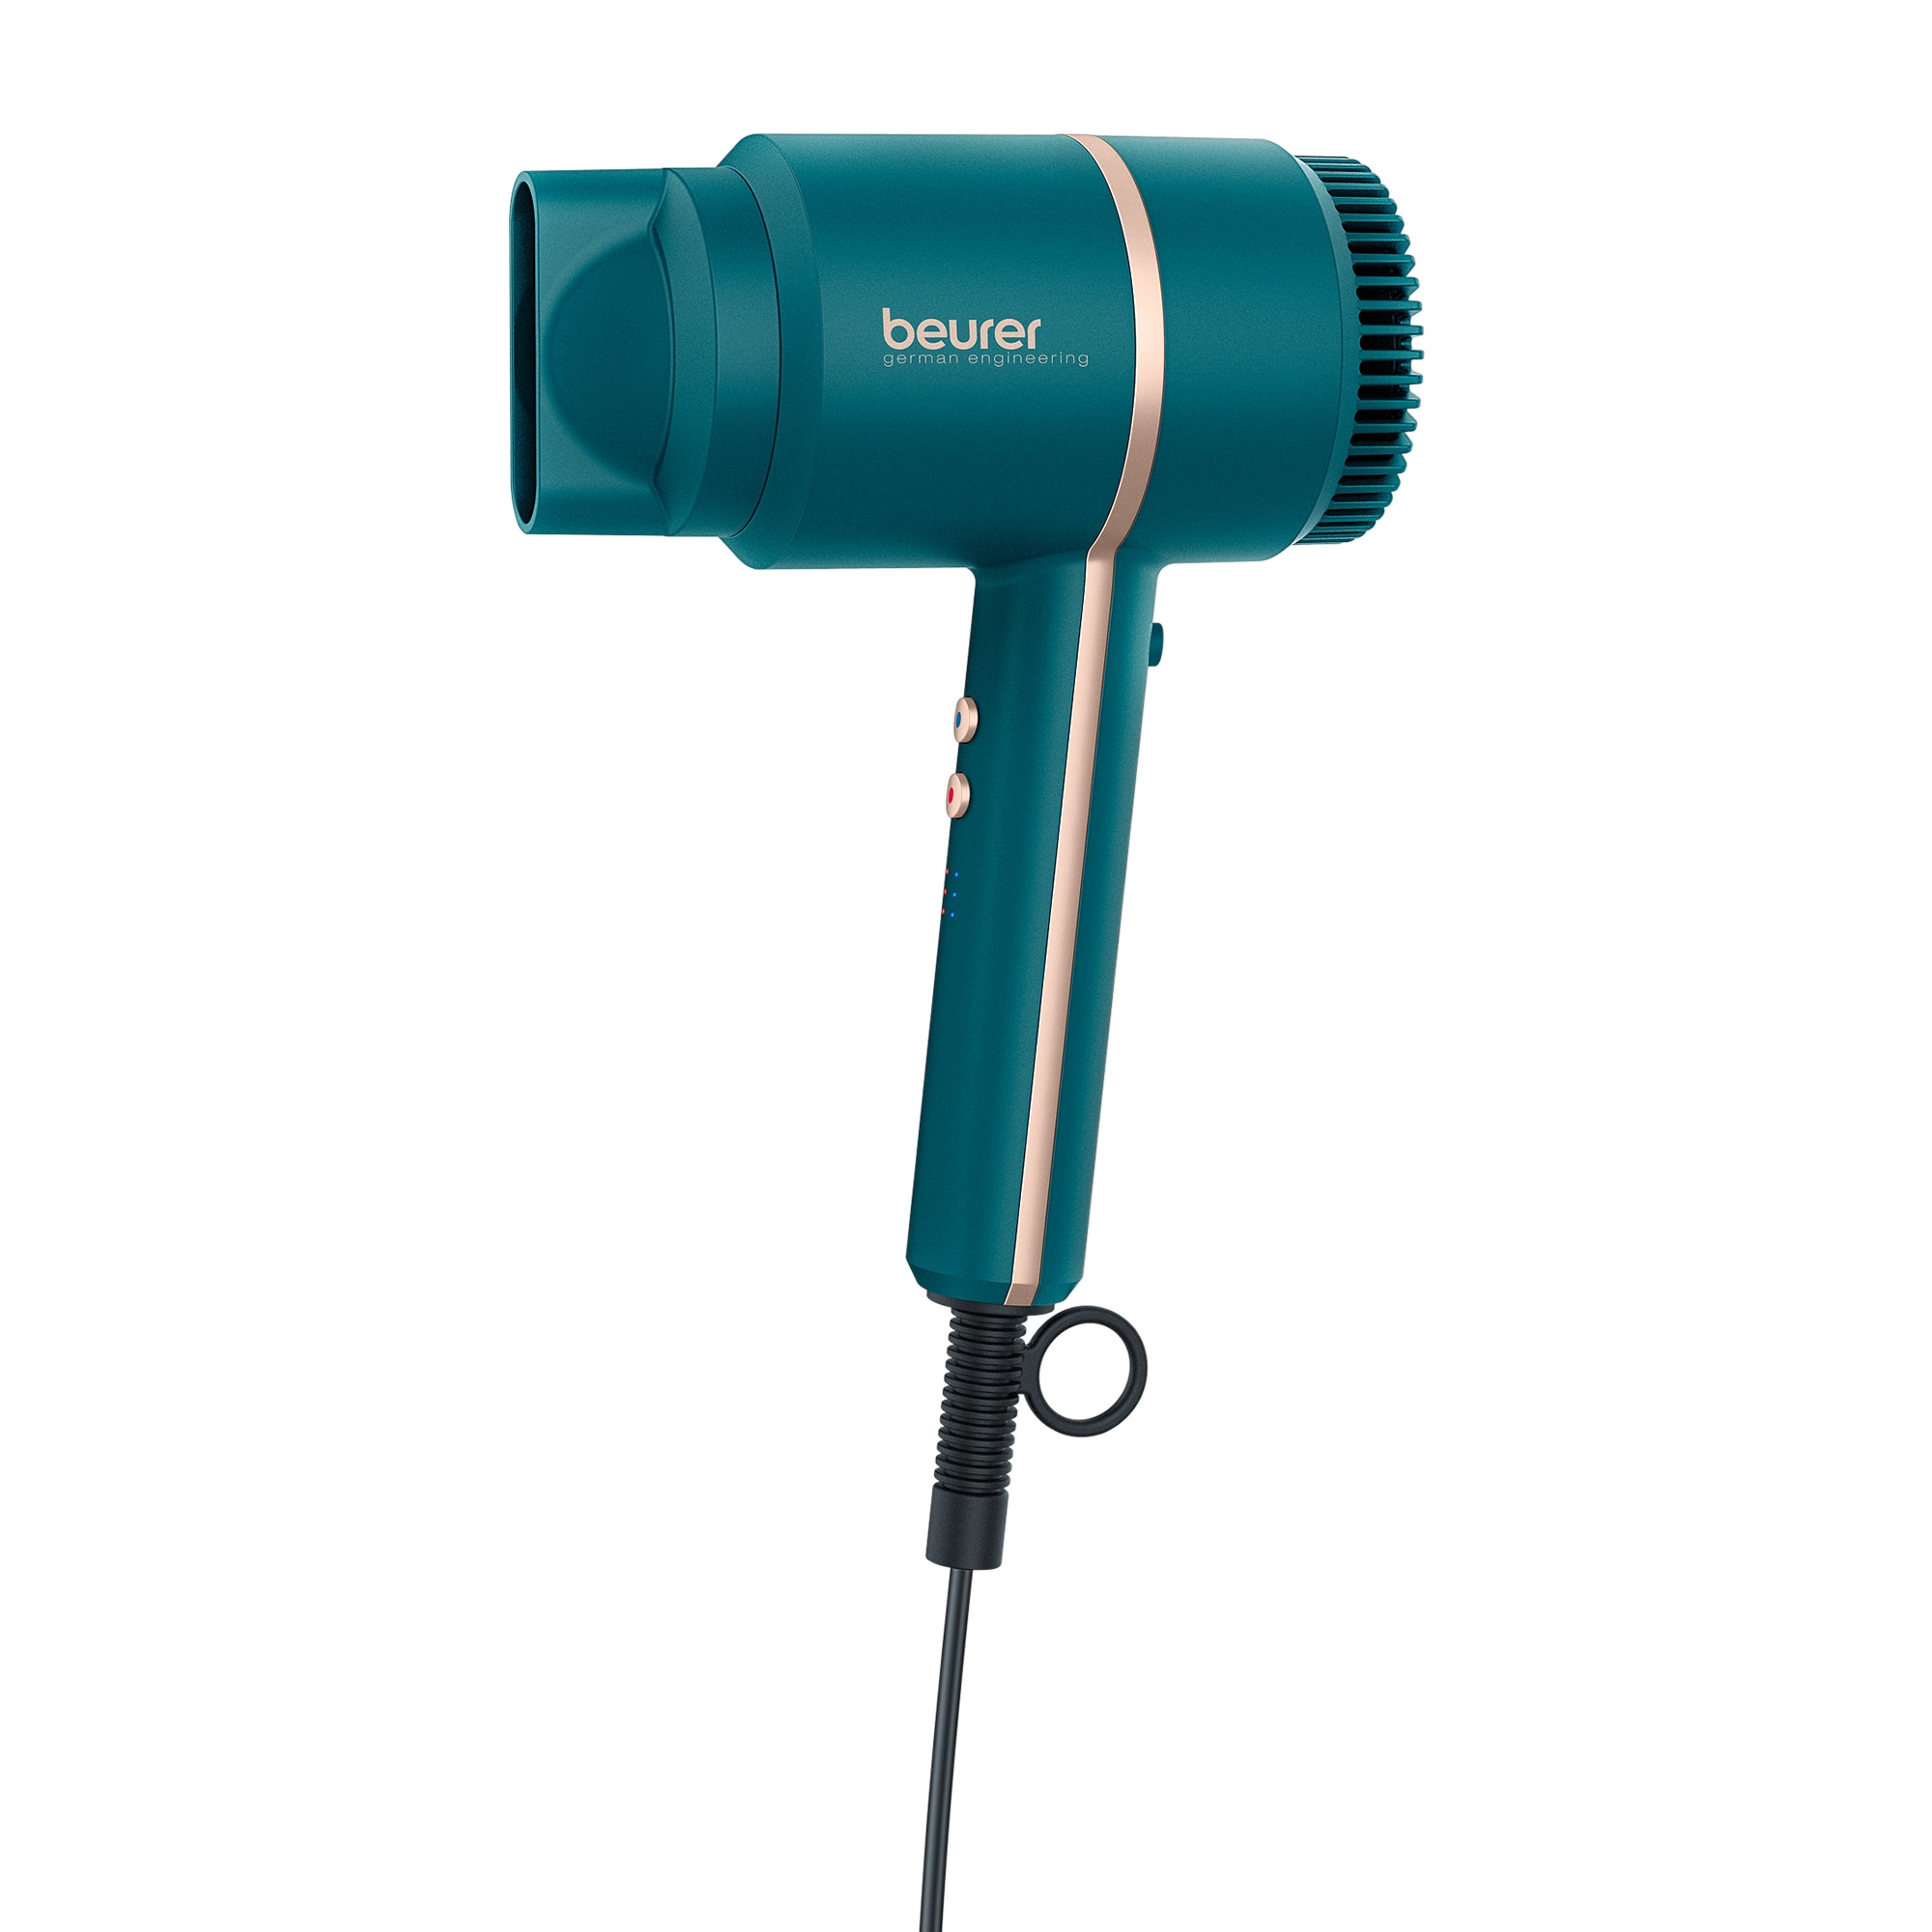 Beurer Compact Hair Dryer Image 1